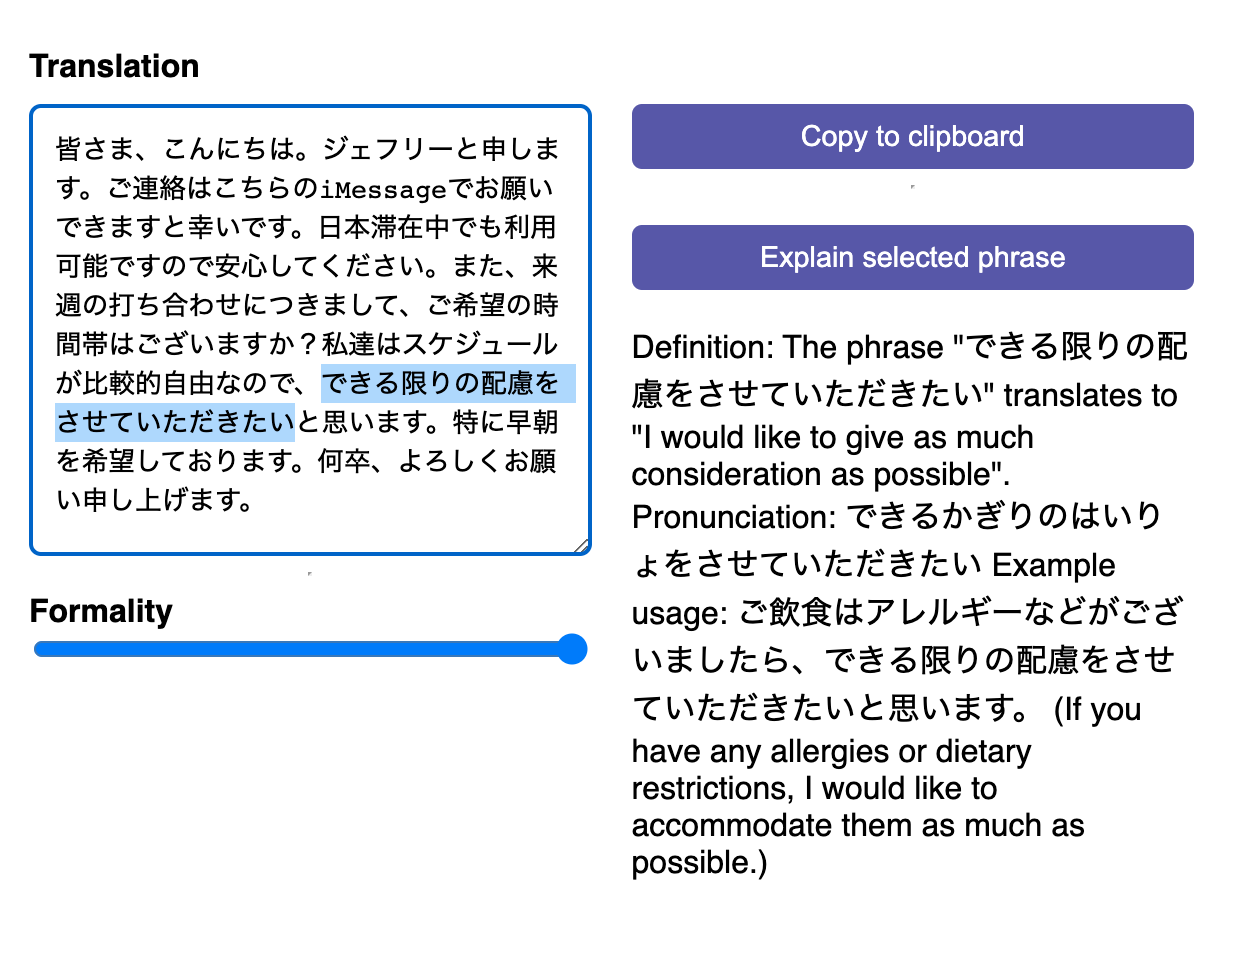 A selected phrase in a Japanese translation, and an explanation of the phrase